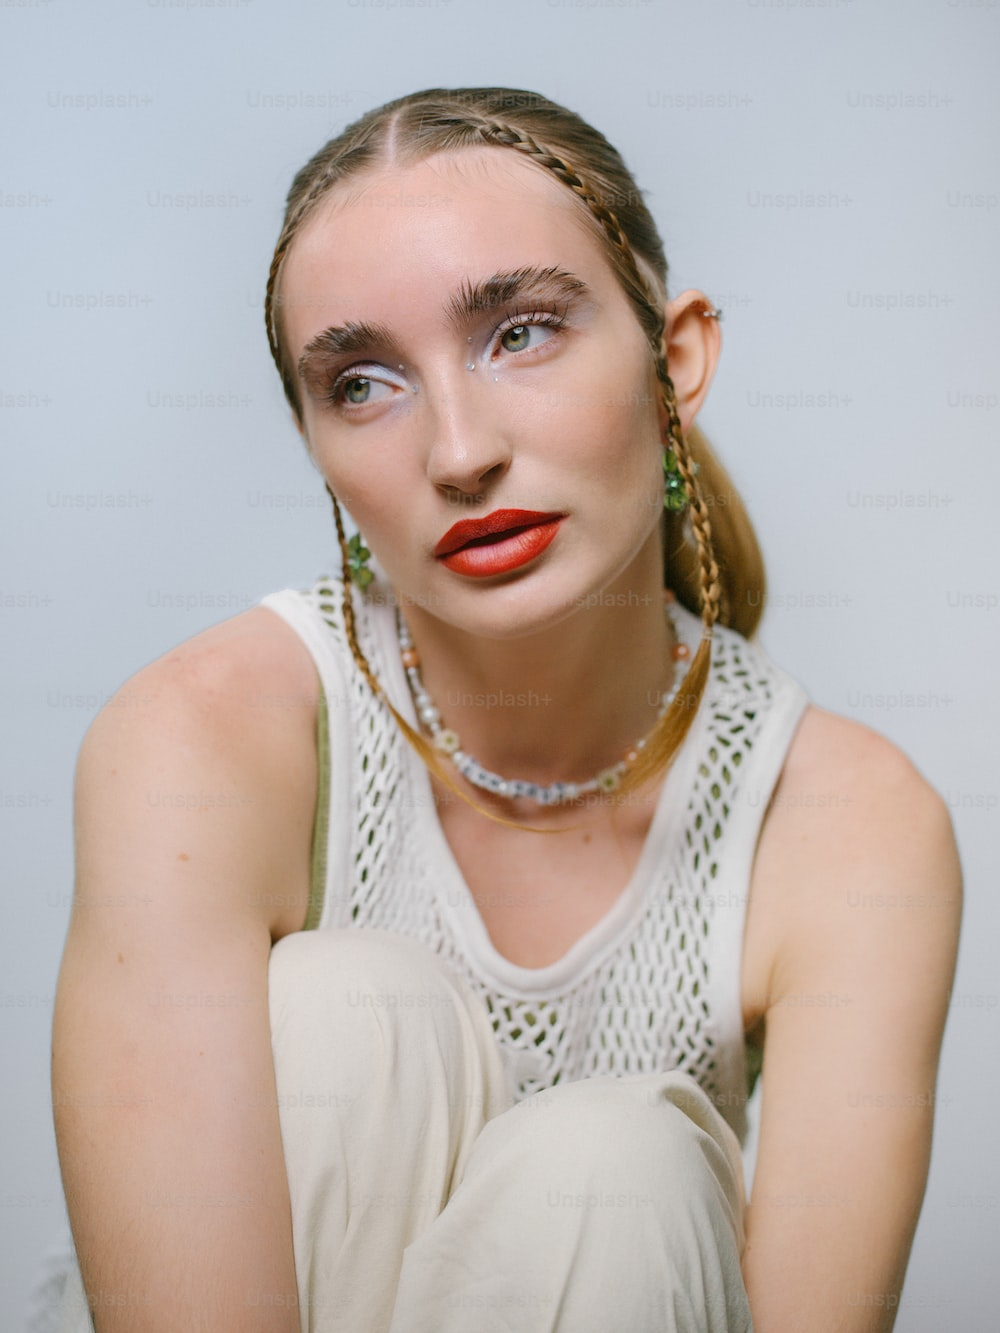 headshot of a model wearing a white tank top and whimsical makeup